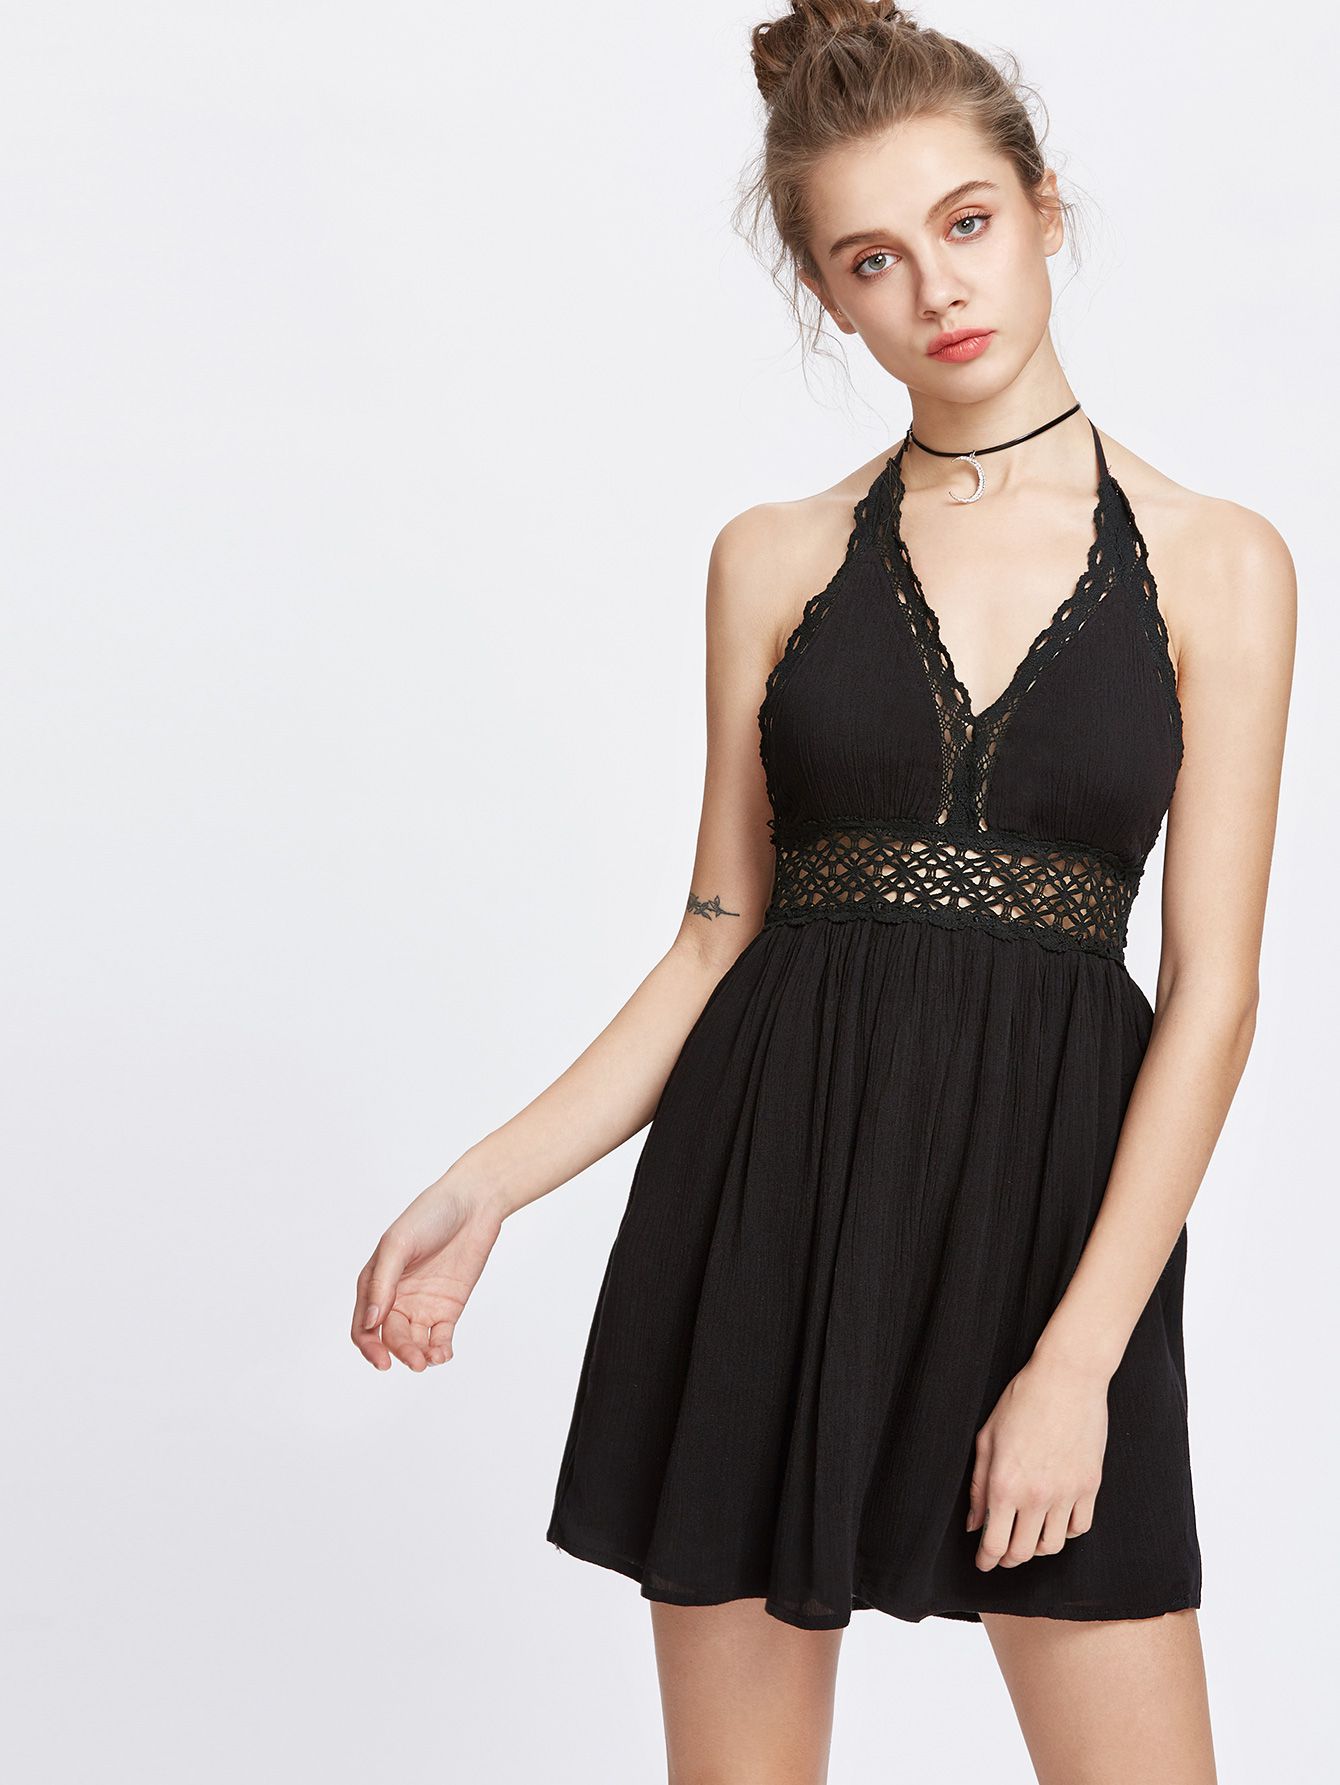 Halter Hollow Out Lace Crochet Backless Dress